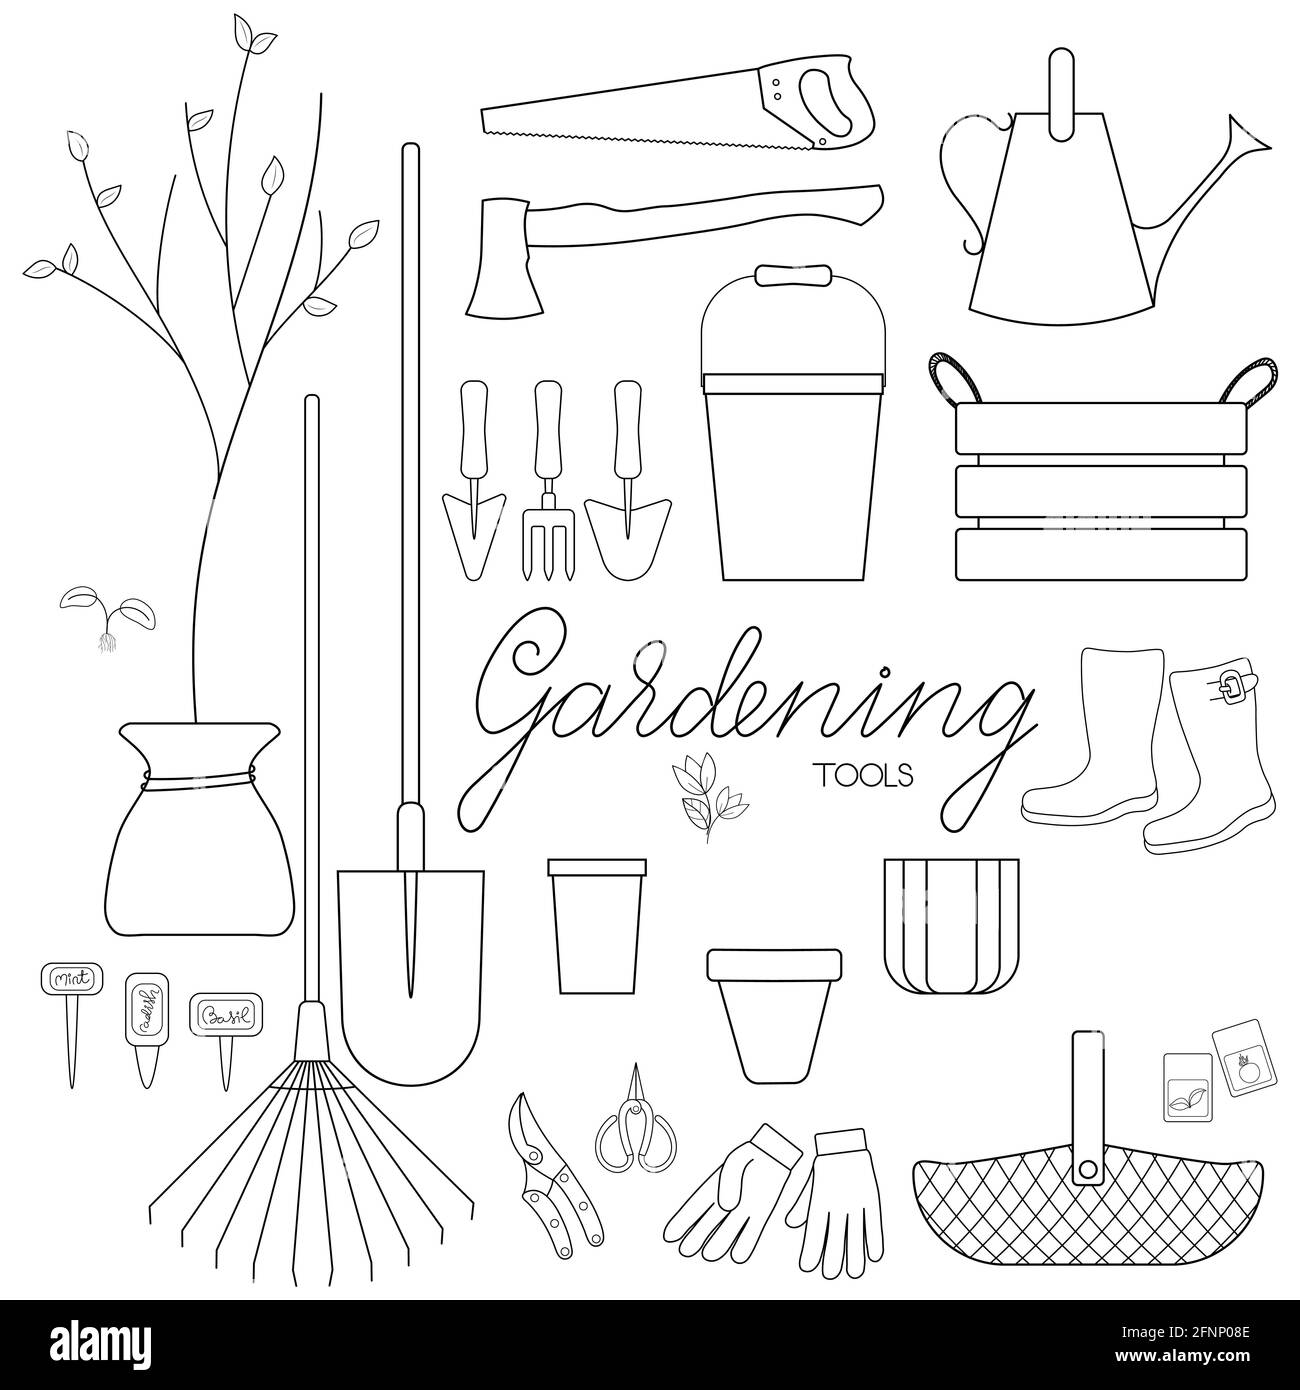 Gardening tools set outline simple minimalistic flat design vector illustration isolated on white background Stock Vector